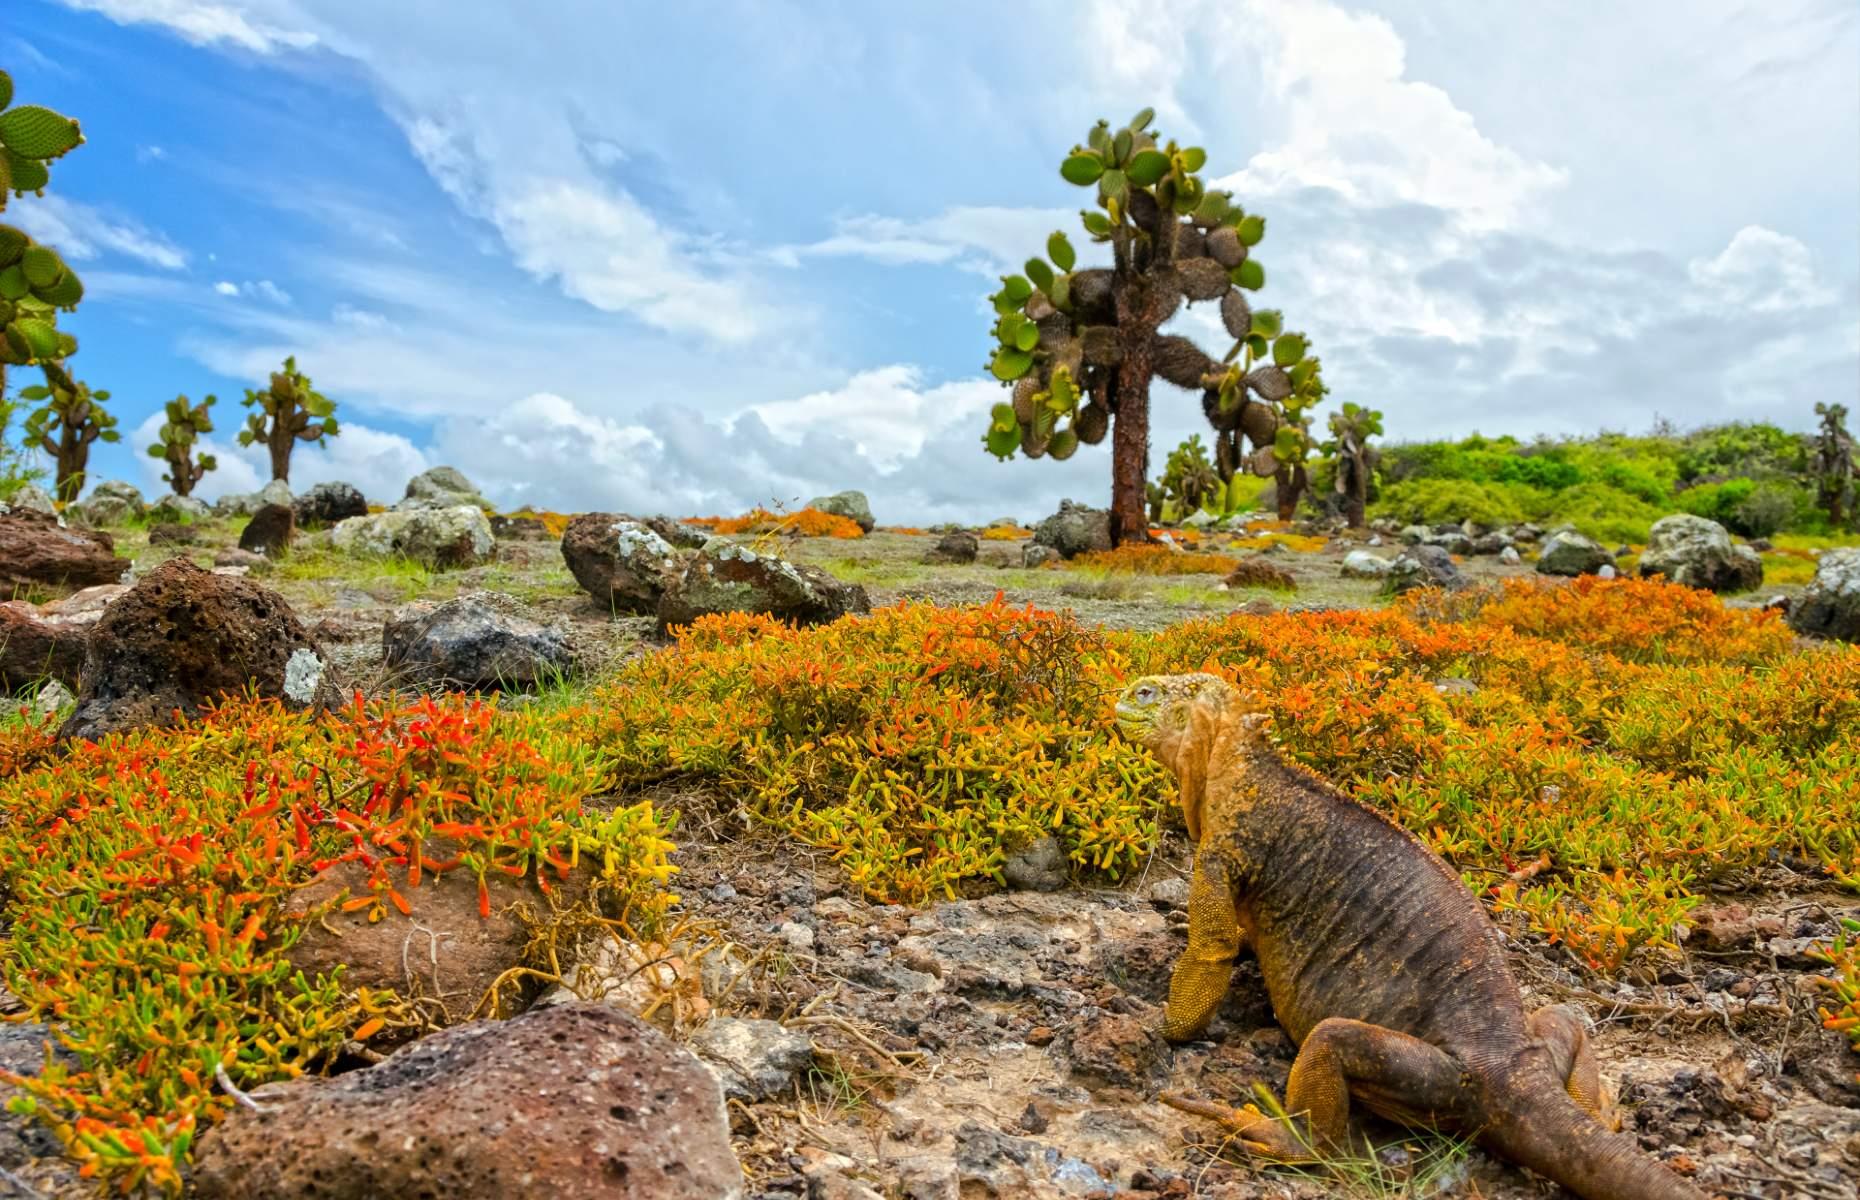 The Galápagos are one of the most biodiverse places on Earth. As they’re so geographically remote, some 80% of land birds, 97% of reptiles and land mammals, and 30% of plants here are endemic – meaning they don’t exist anywhere else in the world. But that makes it all the more important they’re protected. Since 1959, around 97% of the Galápagos’ total surface area has been a designated National Park, while the remaining 3% is home to human settlements.